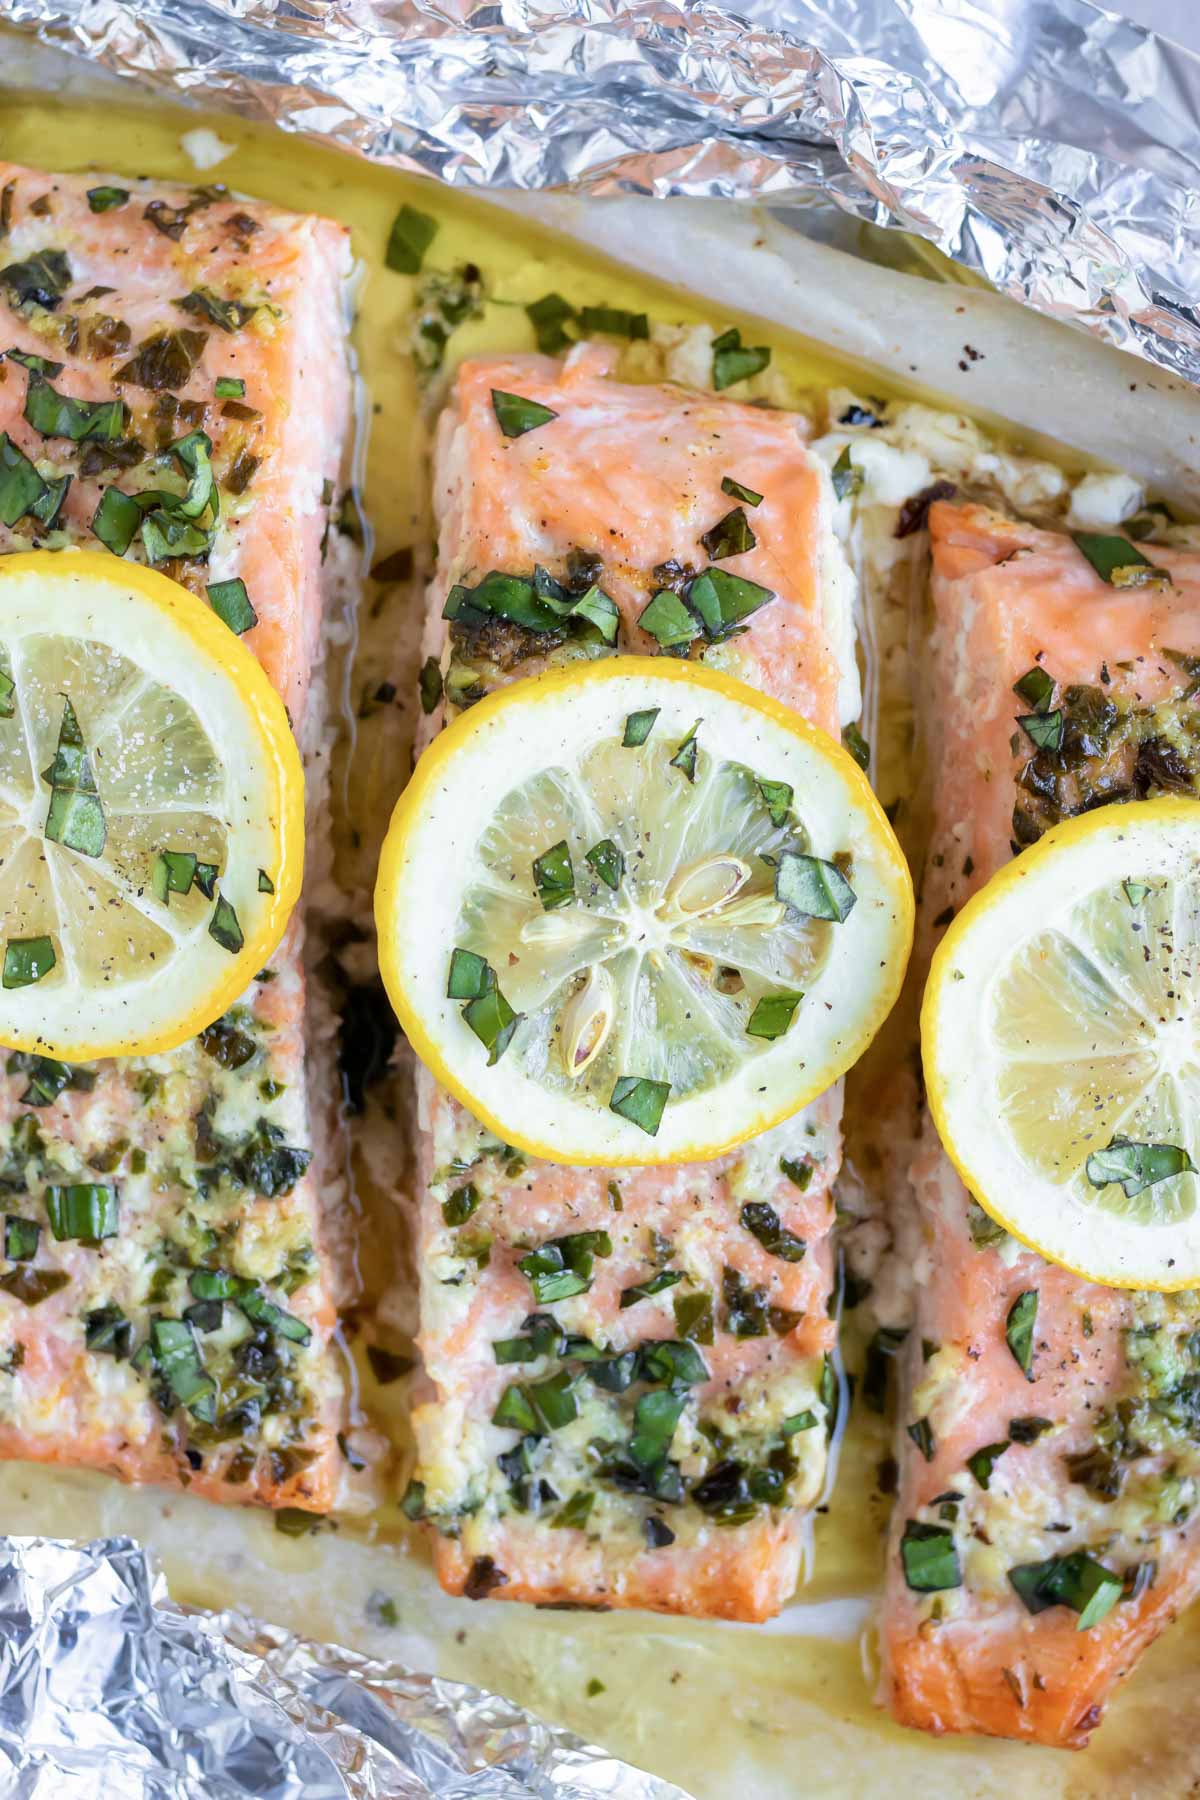 A close-up image of a lemon basil baked salmon recipe that has been baked in foil packets.